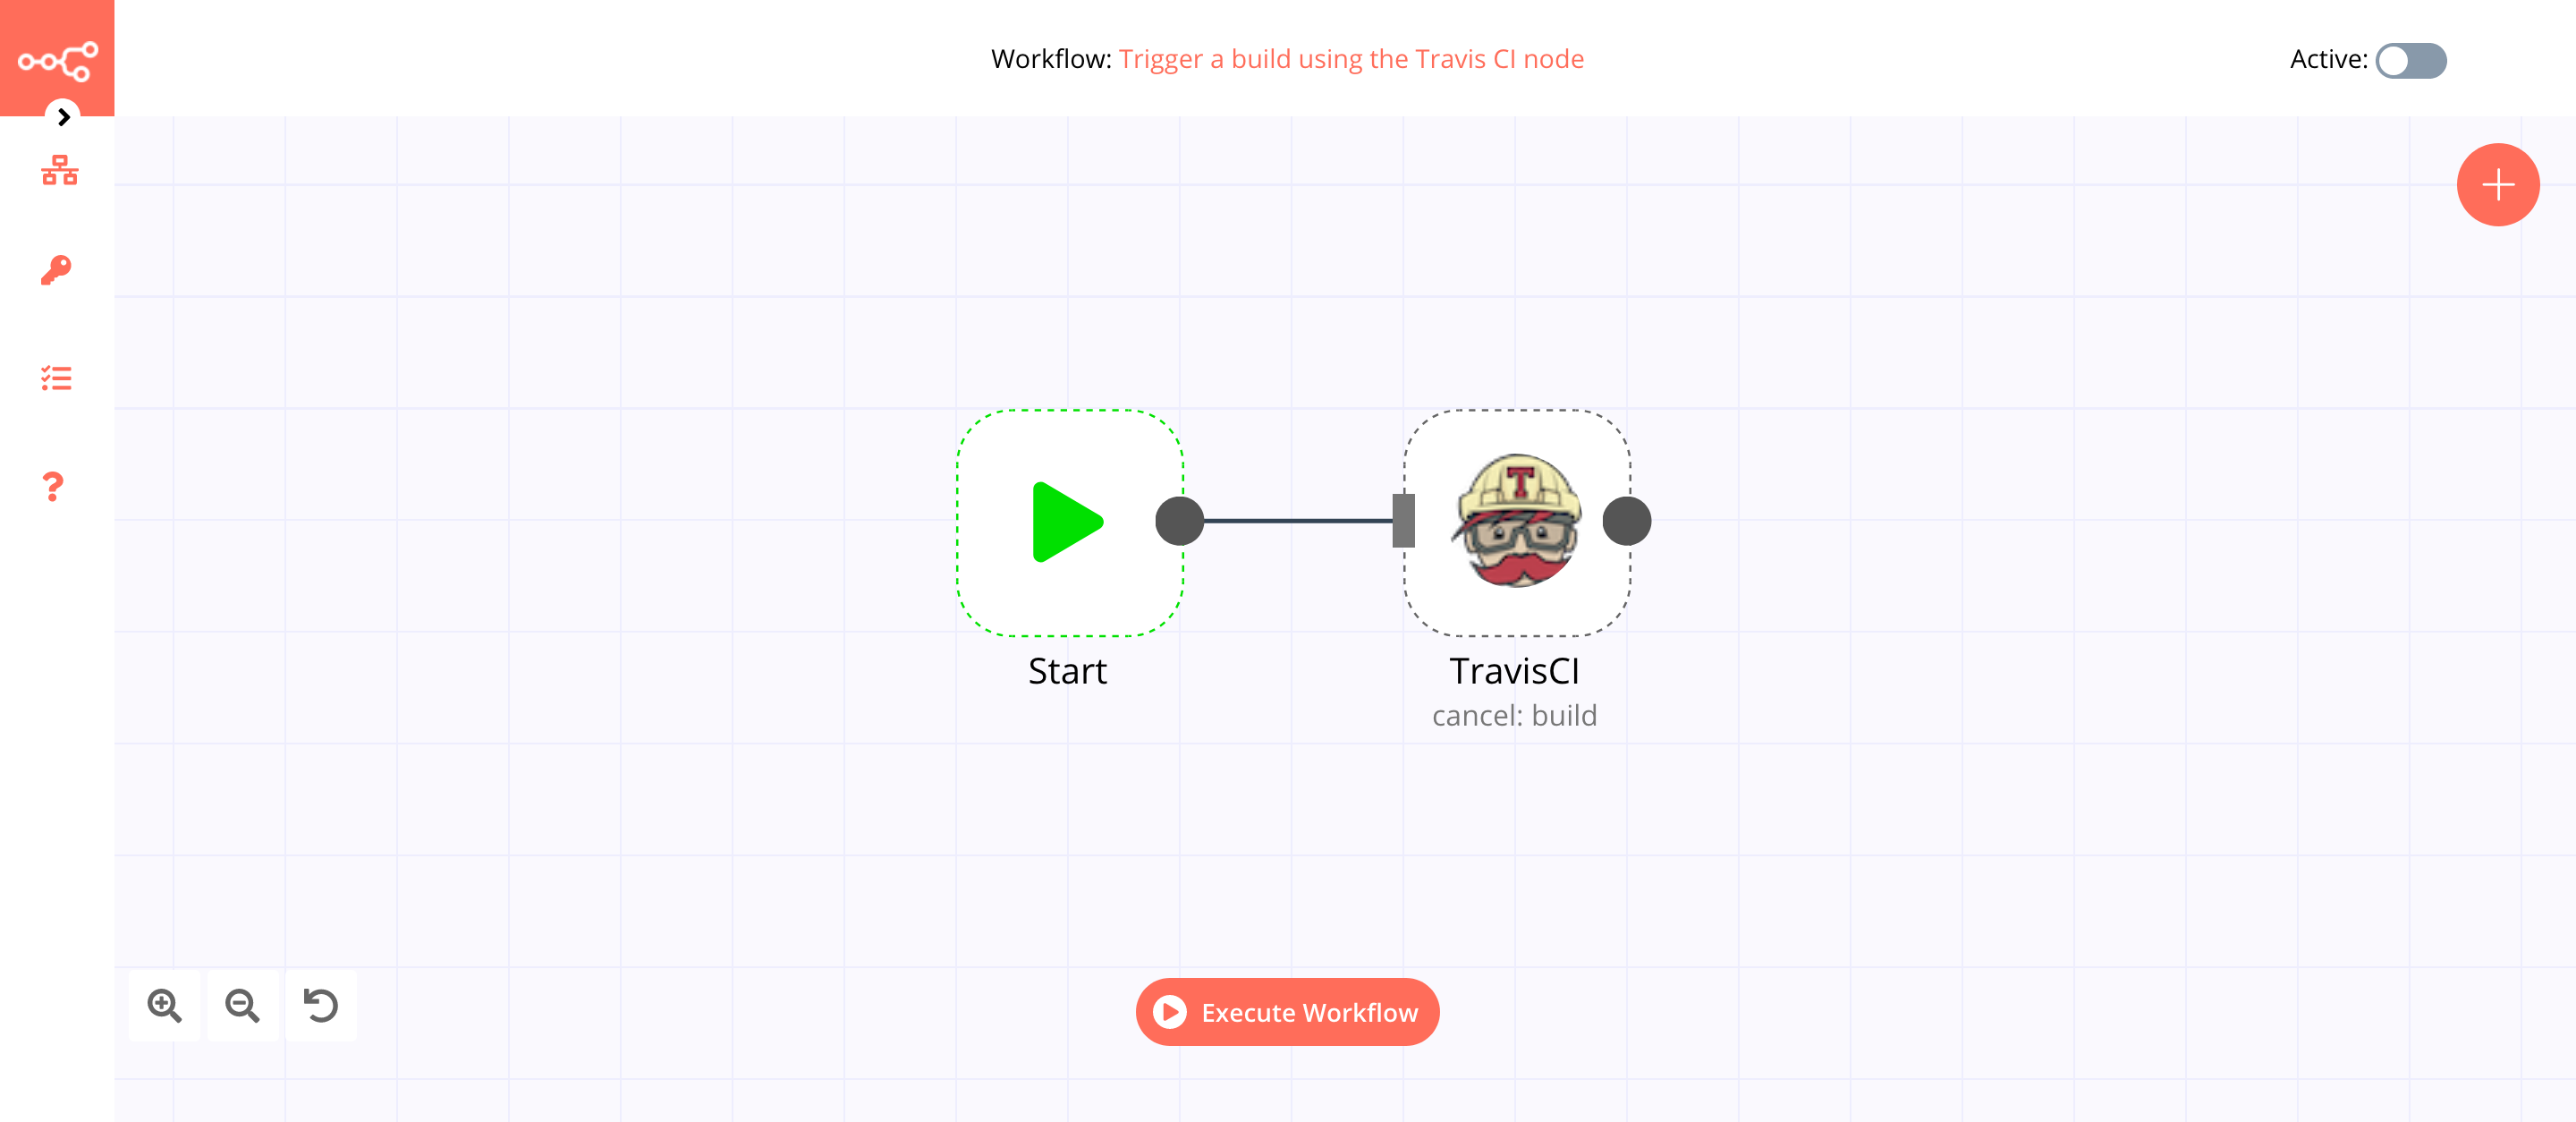 A workflow with the Travis CI node